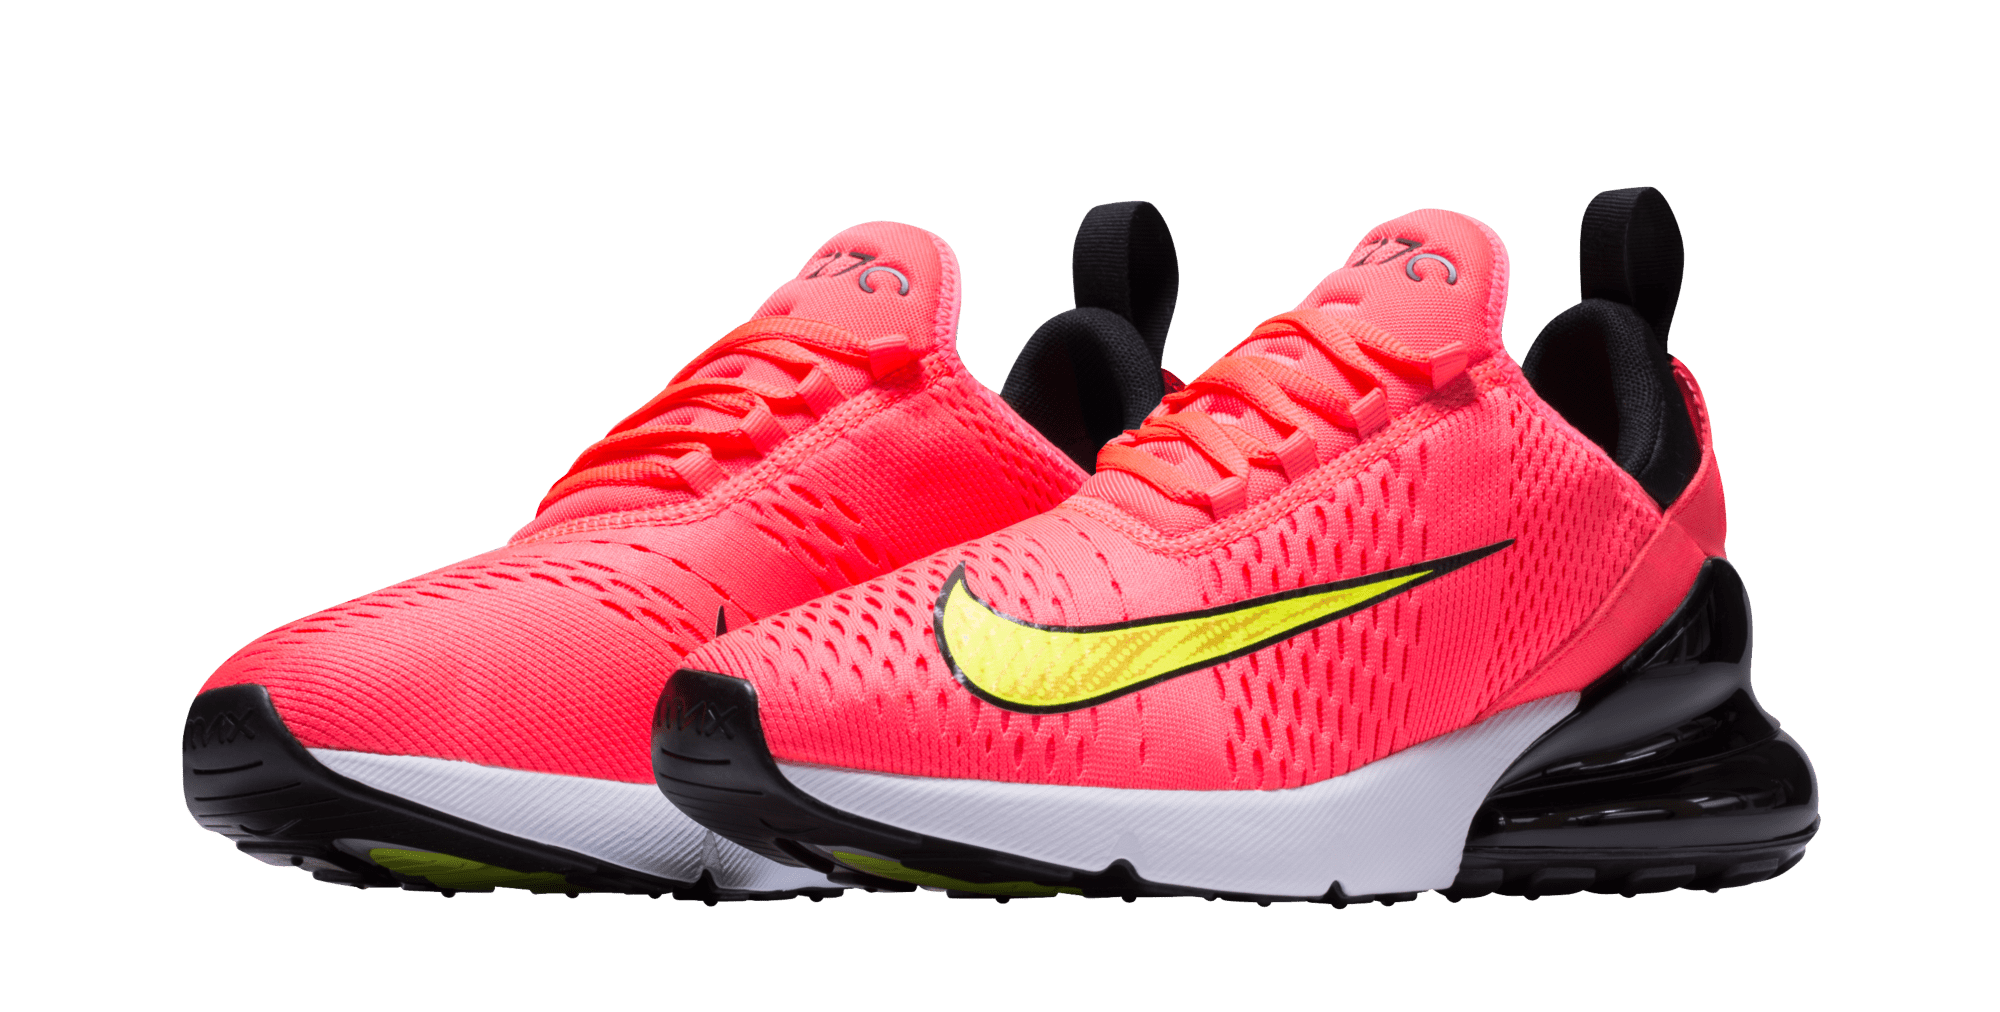 Transparente Mal uso Torbellino Nike Mercurial Heritage Air Max 270 iD Options | Sole Collector